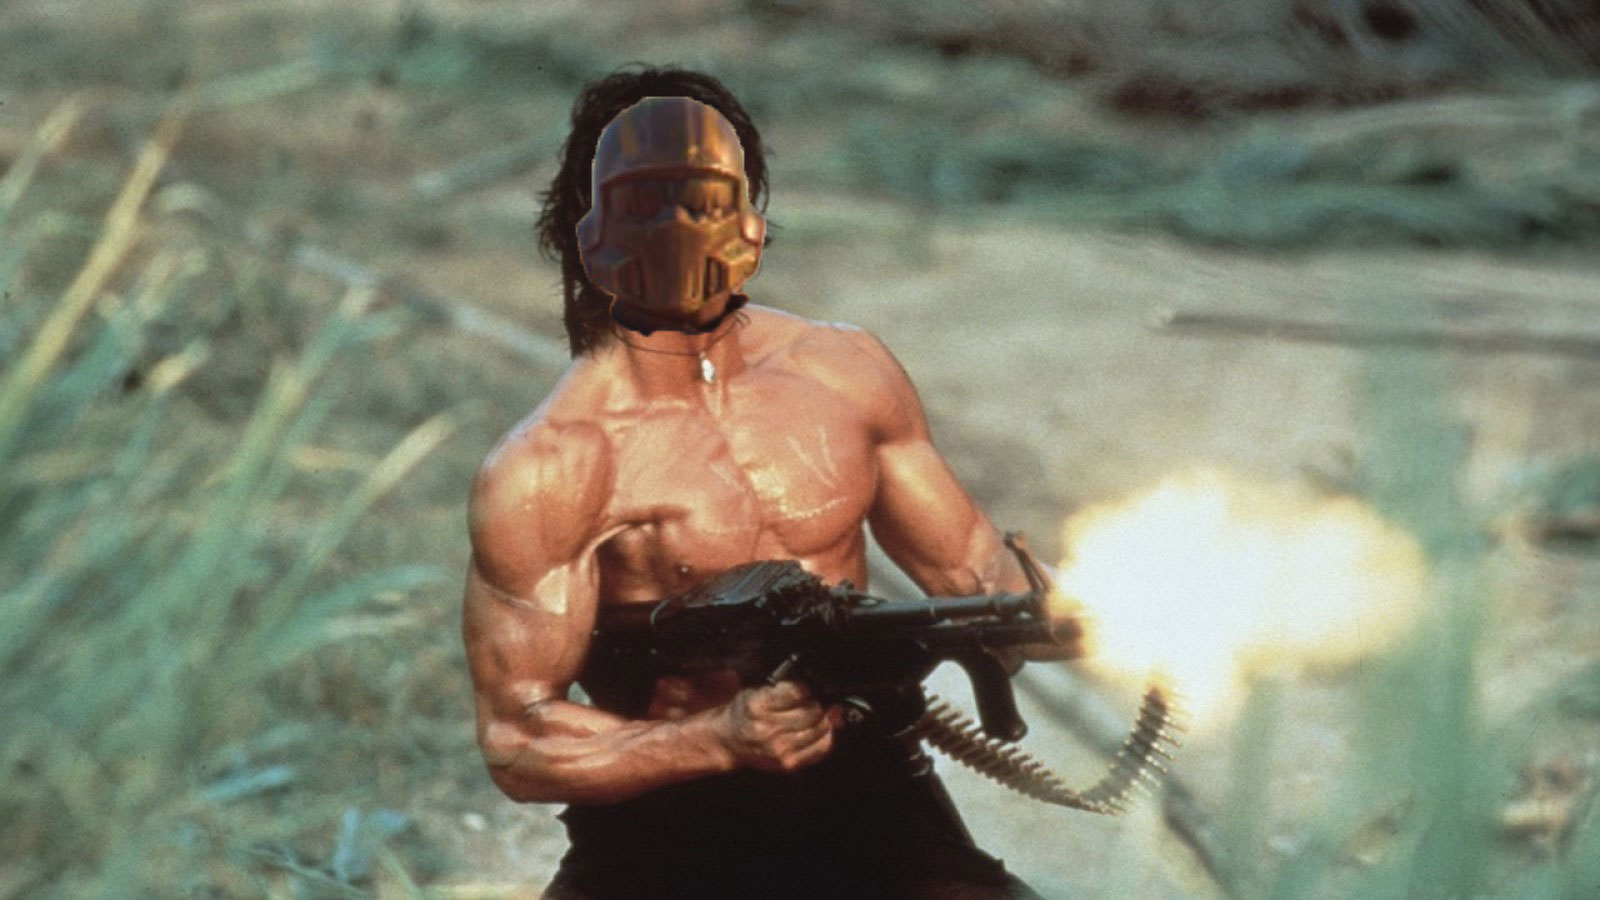 An image of John Rambo, namesake of the Rambo films, firing a machine gun offscreen. The default helmet form Helldivers 2 is photoshopped in place of his face.